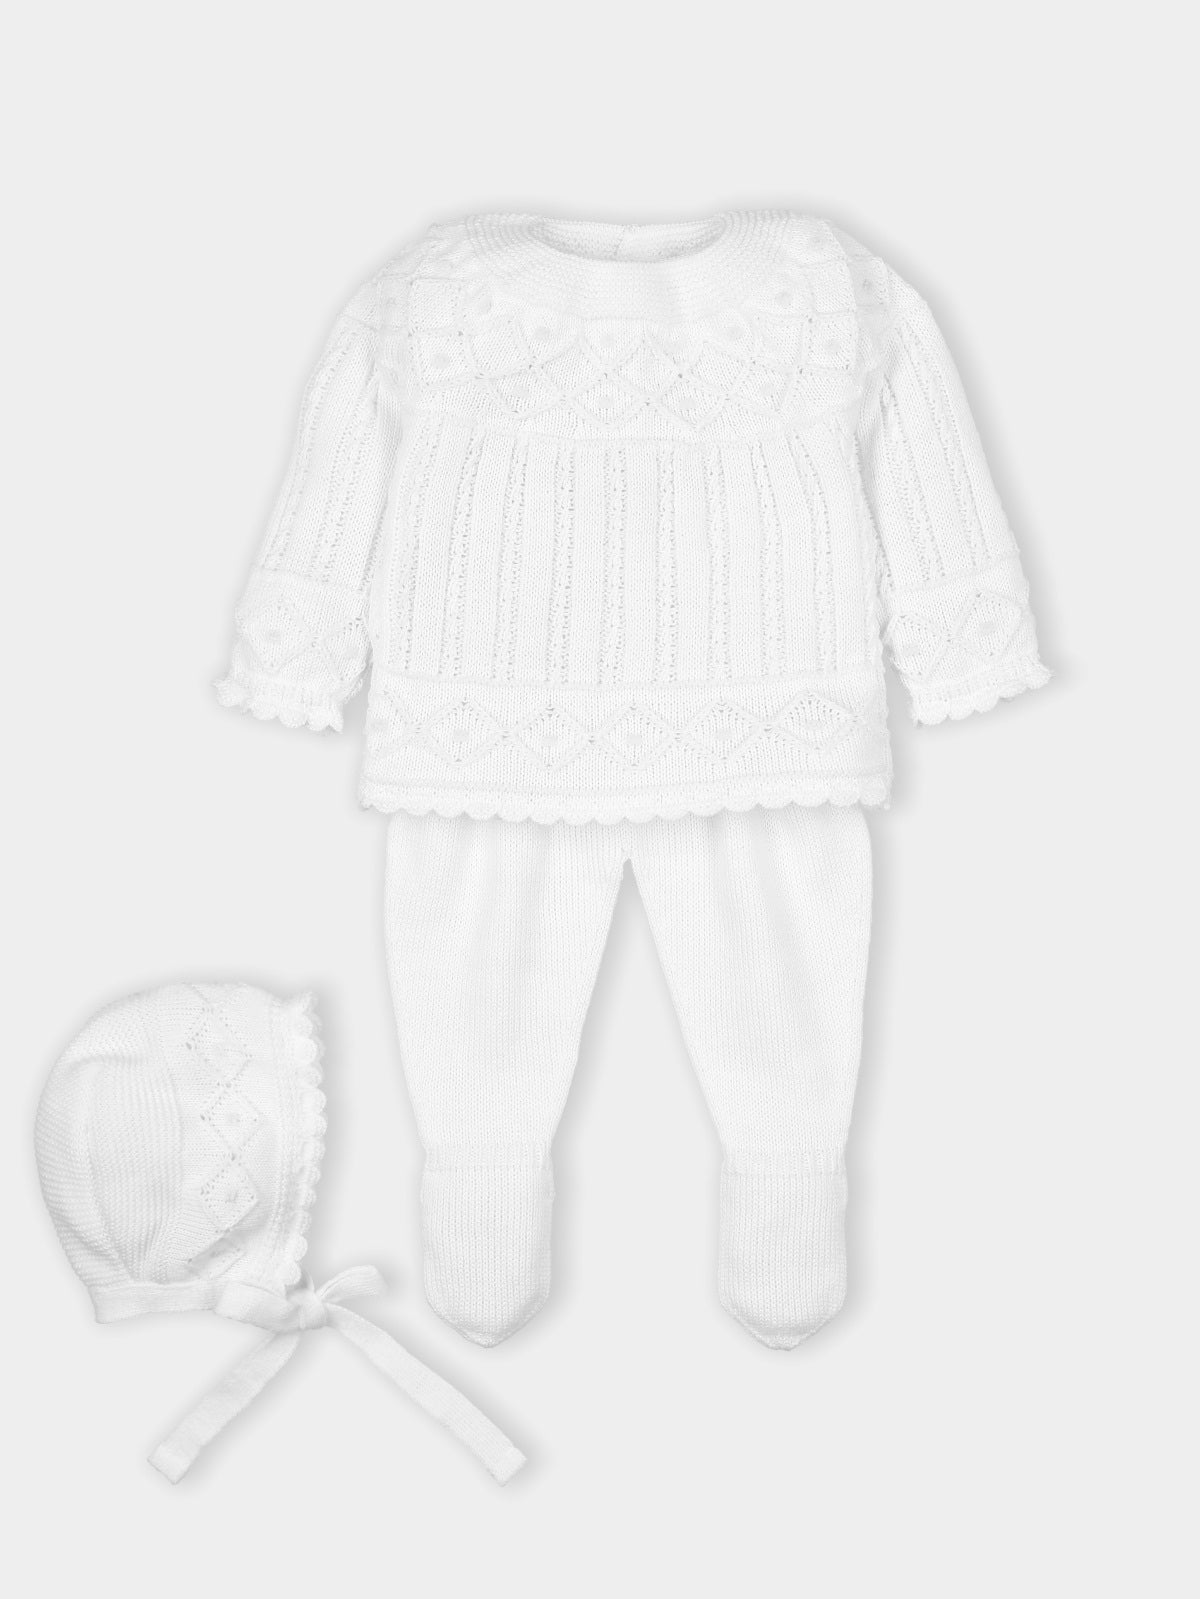 Mac Ilusion branded baby girls three piece knitted set finished in white. This set  consists of a knitted sweatshirt, closed feet trousers and a matching bonnet. Comes presented in a gift box, making it perfect for a new baby girl gift. Available in sizes 1 month, 3 month & 6 month.  Also available in Pink.  100% Acrylic 